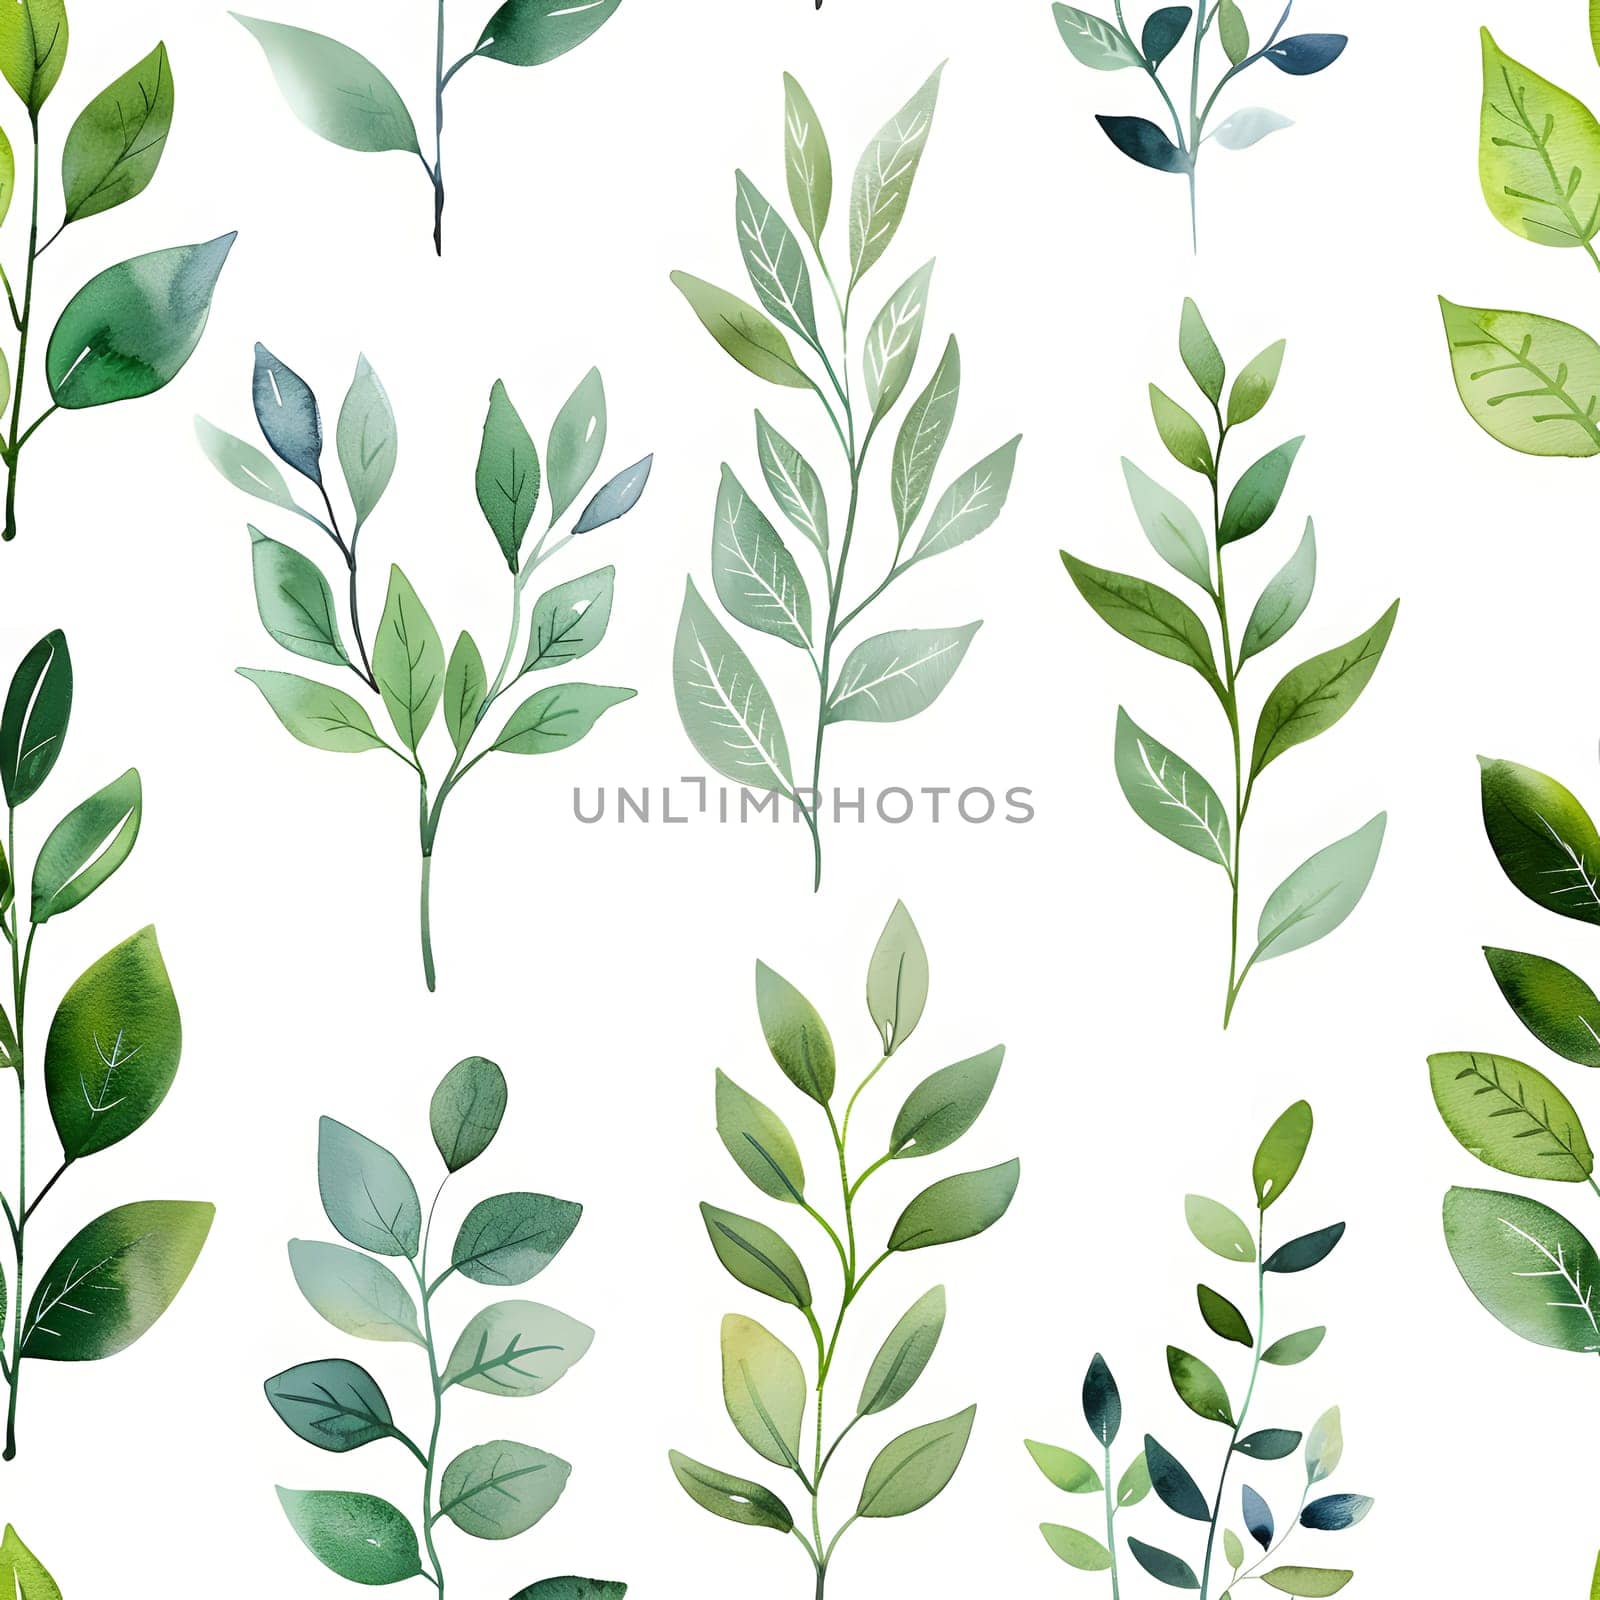 An elegant seamless pattern featuring green leaves on a white background, showcasing the beauty and intricacy of botanical art. This design is perfect for lovers of plants, leaves, and nature